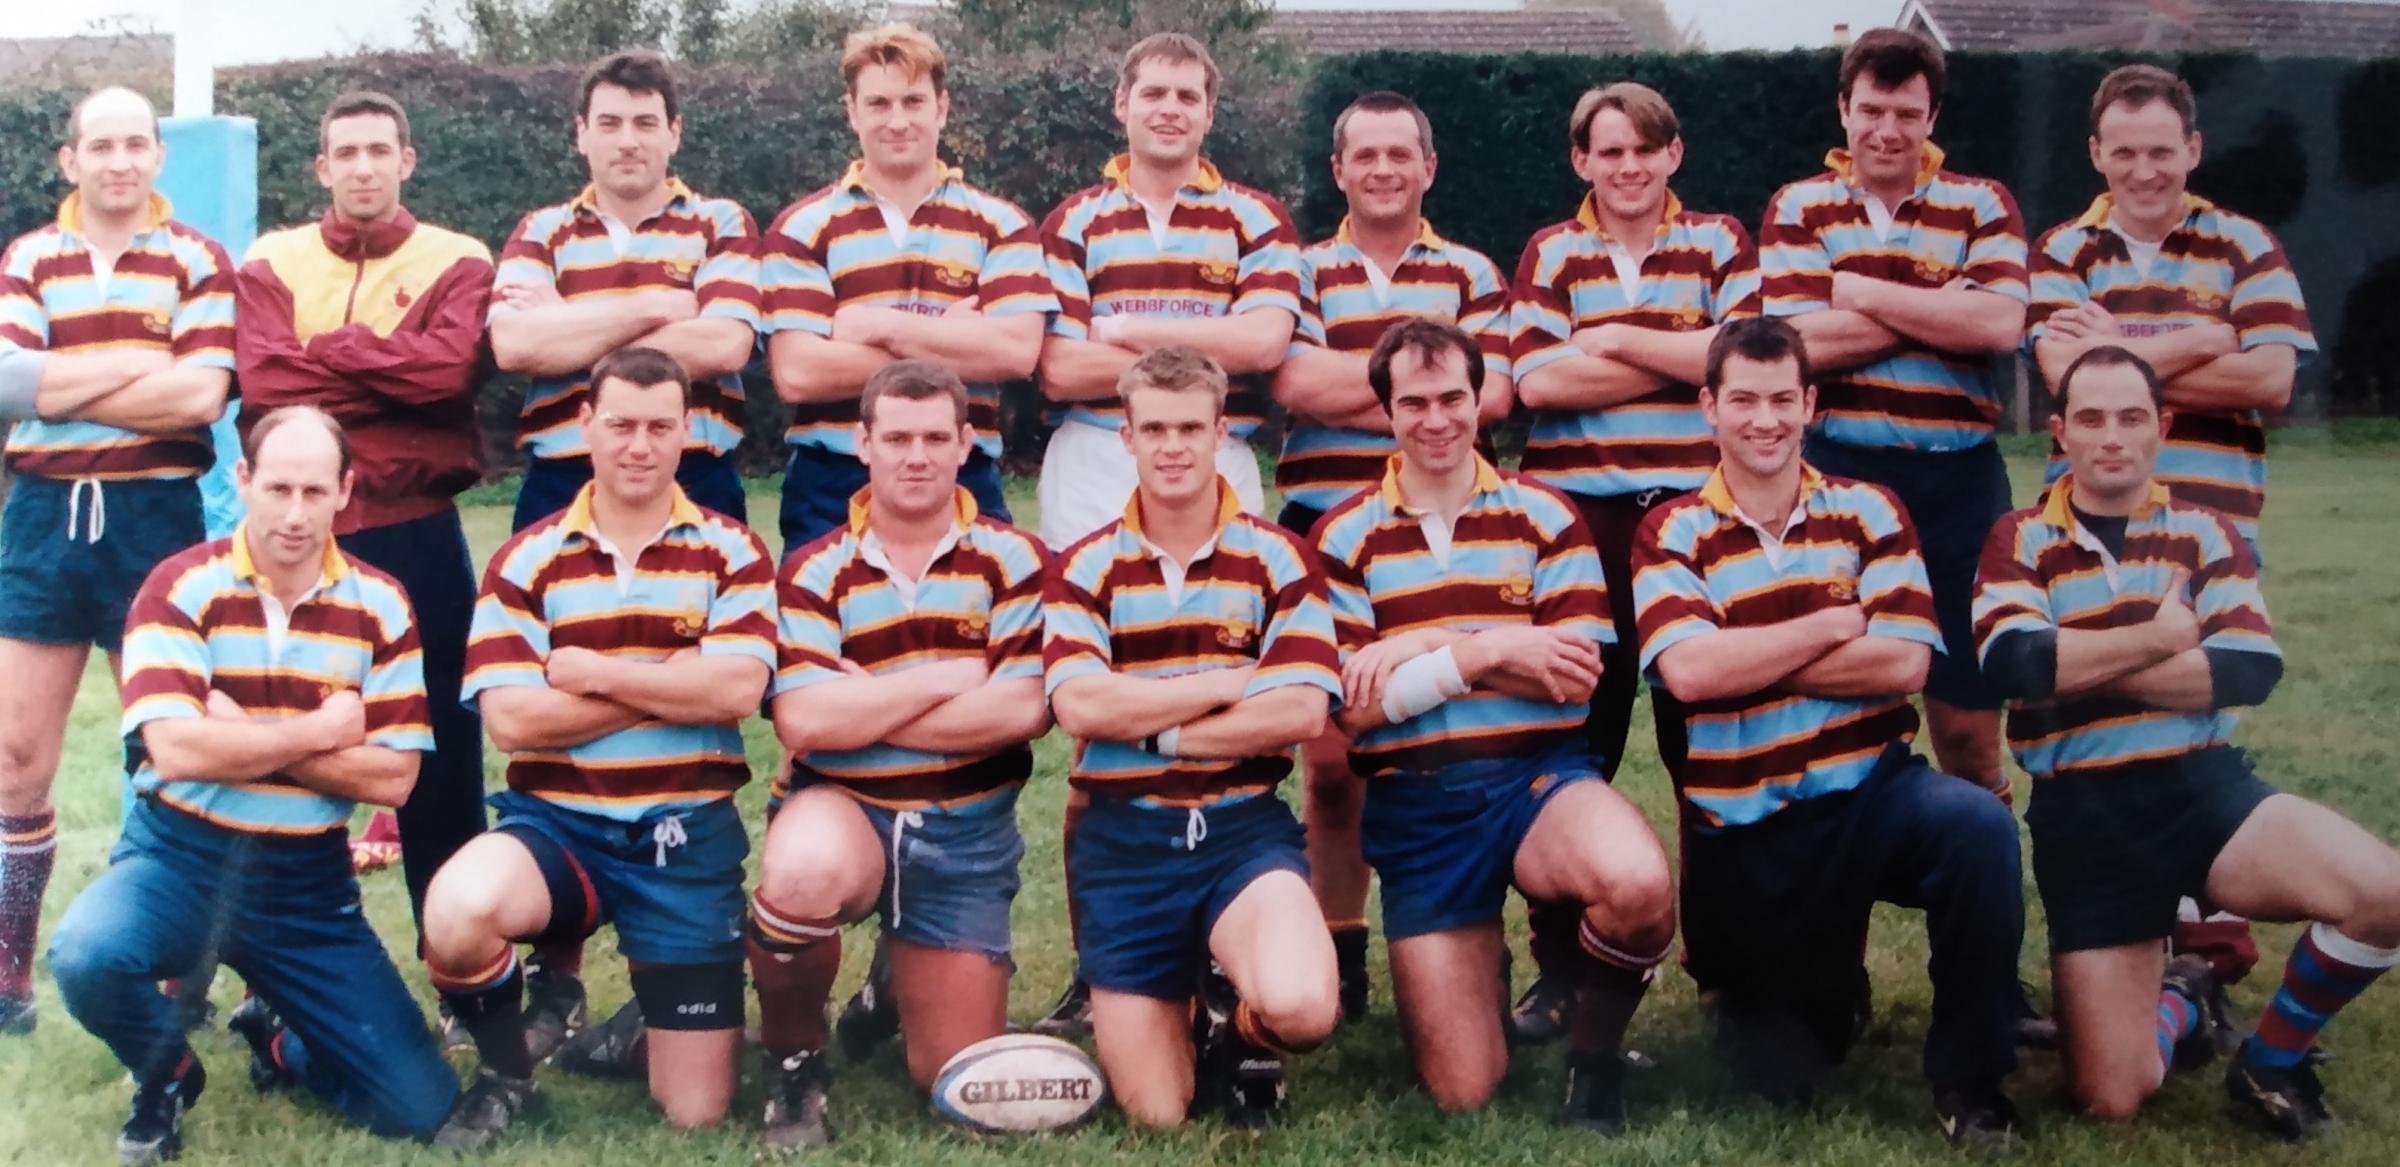 Malvern RFC’s 2nd XV line up for the camera. No year to date the picture, sadly. Can anyone shed any light on when the photograph might have been taken?